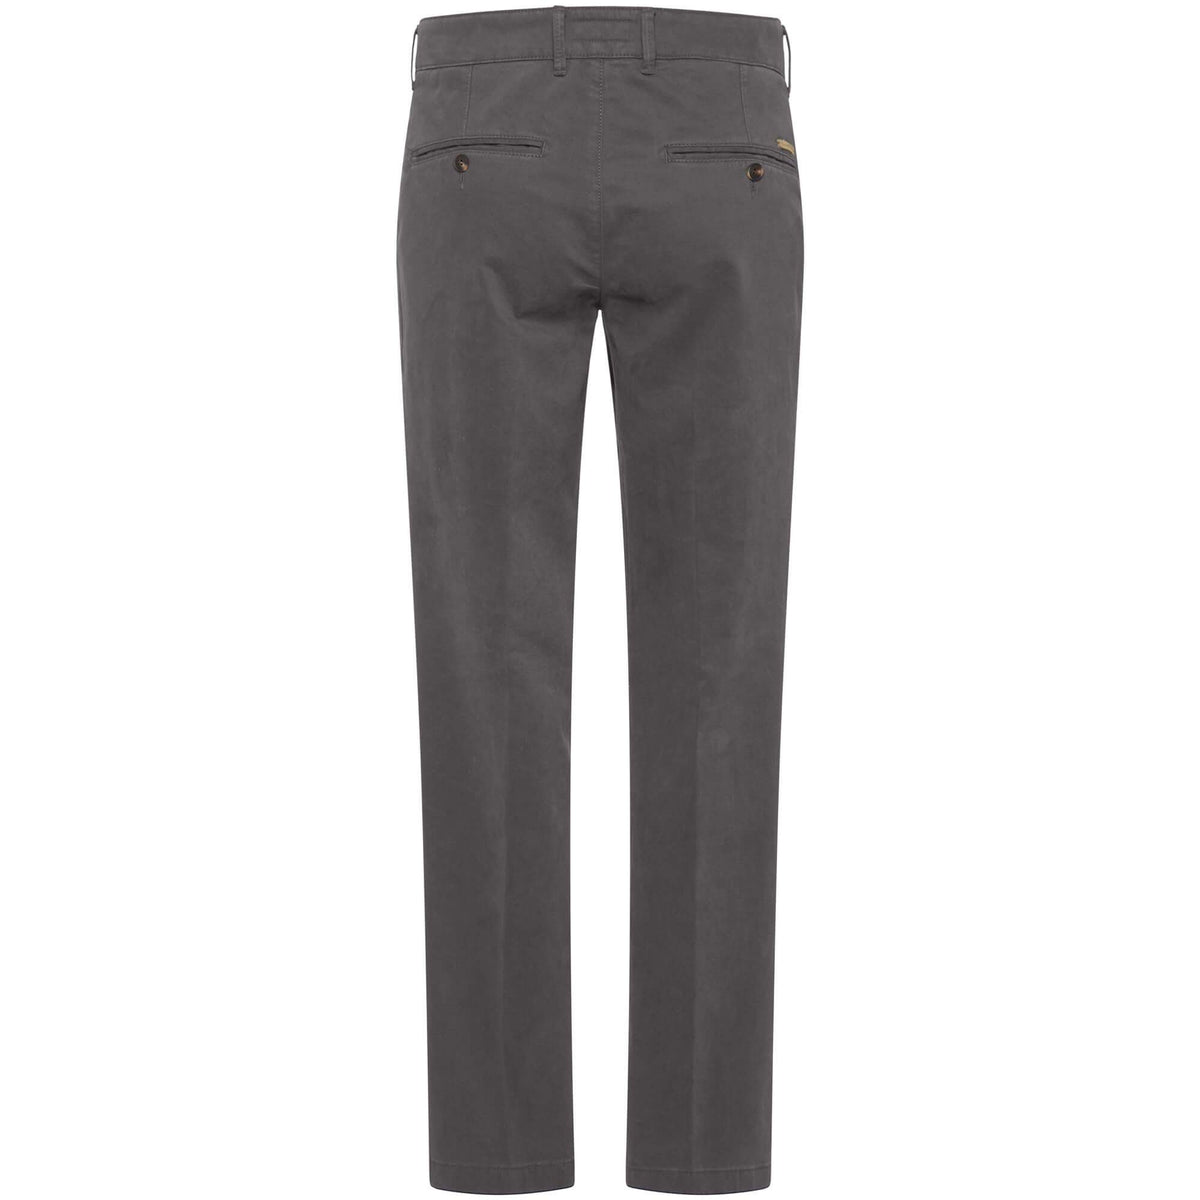 Fynch-Hatton TROUSERS TOGO FLAT FRONT PIMA POWER STRETCH PANTS GREY